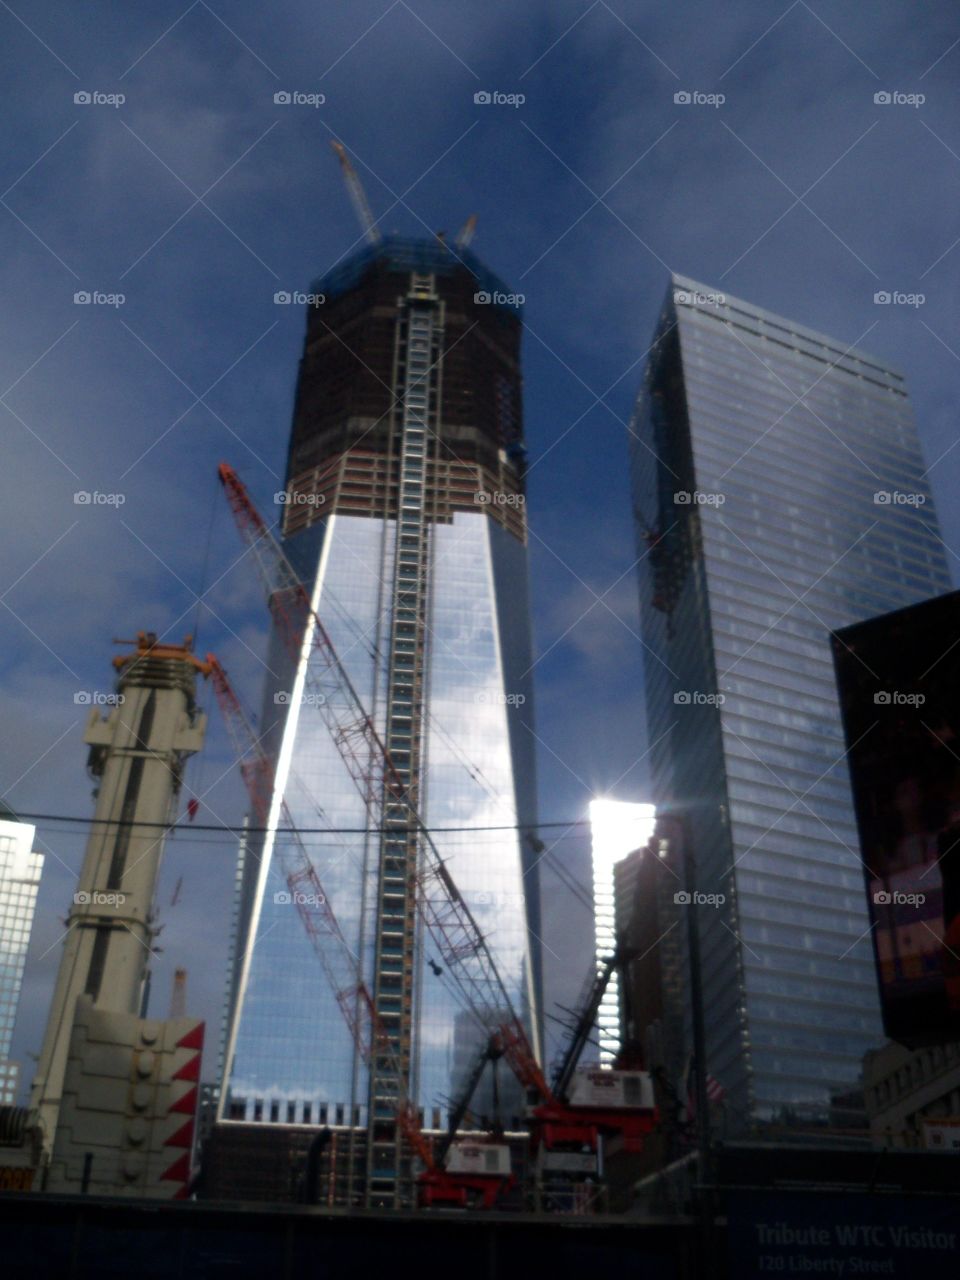 the new tower 1 in new york city under construction